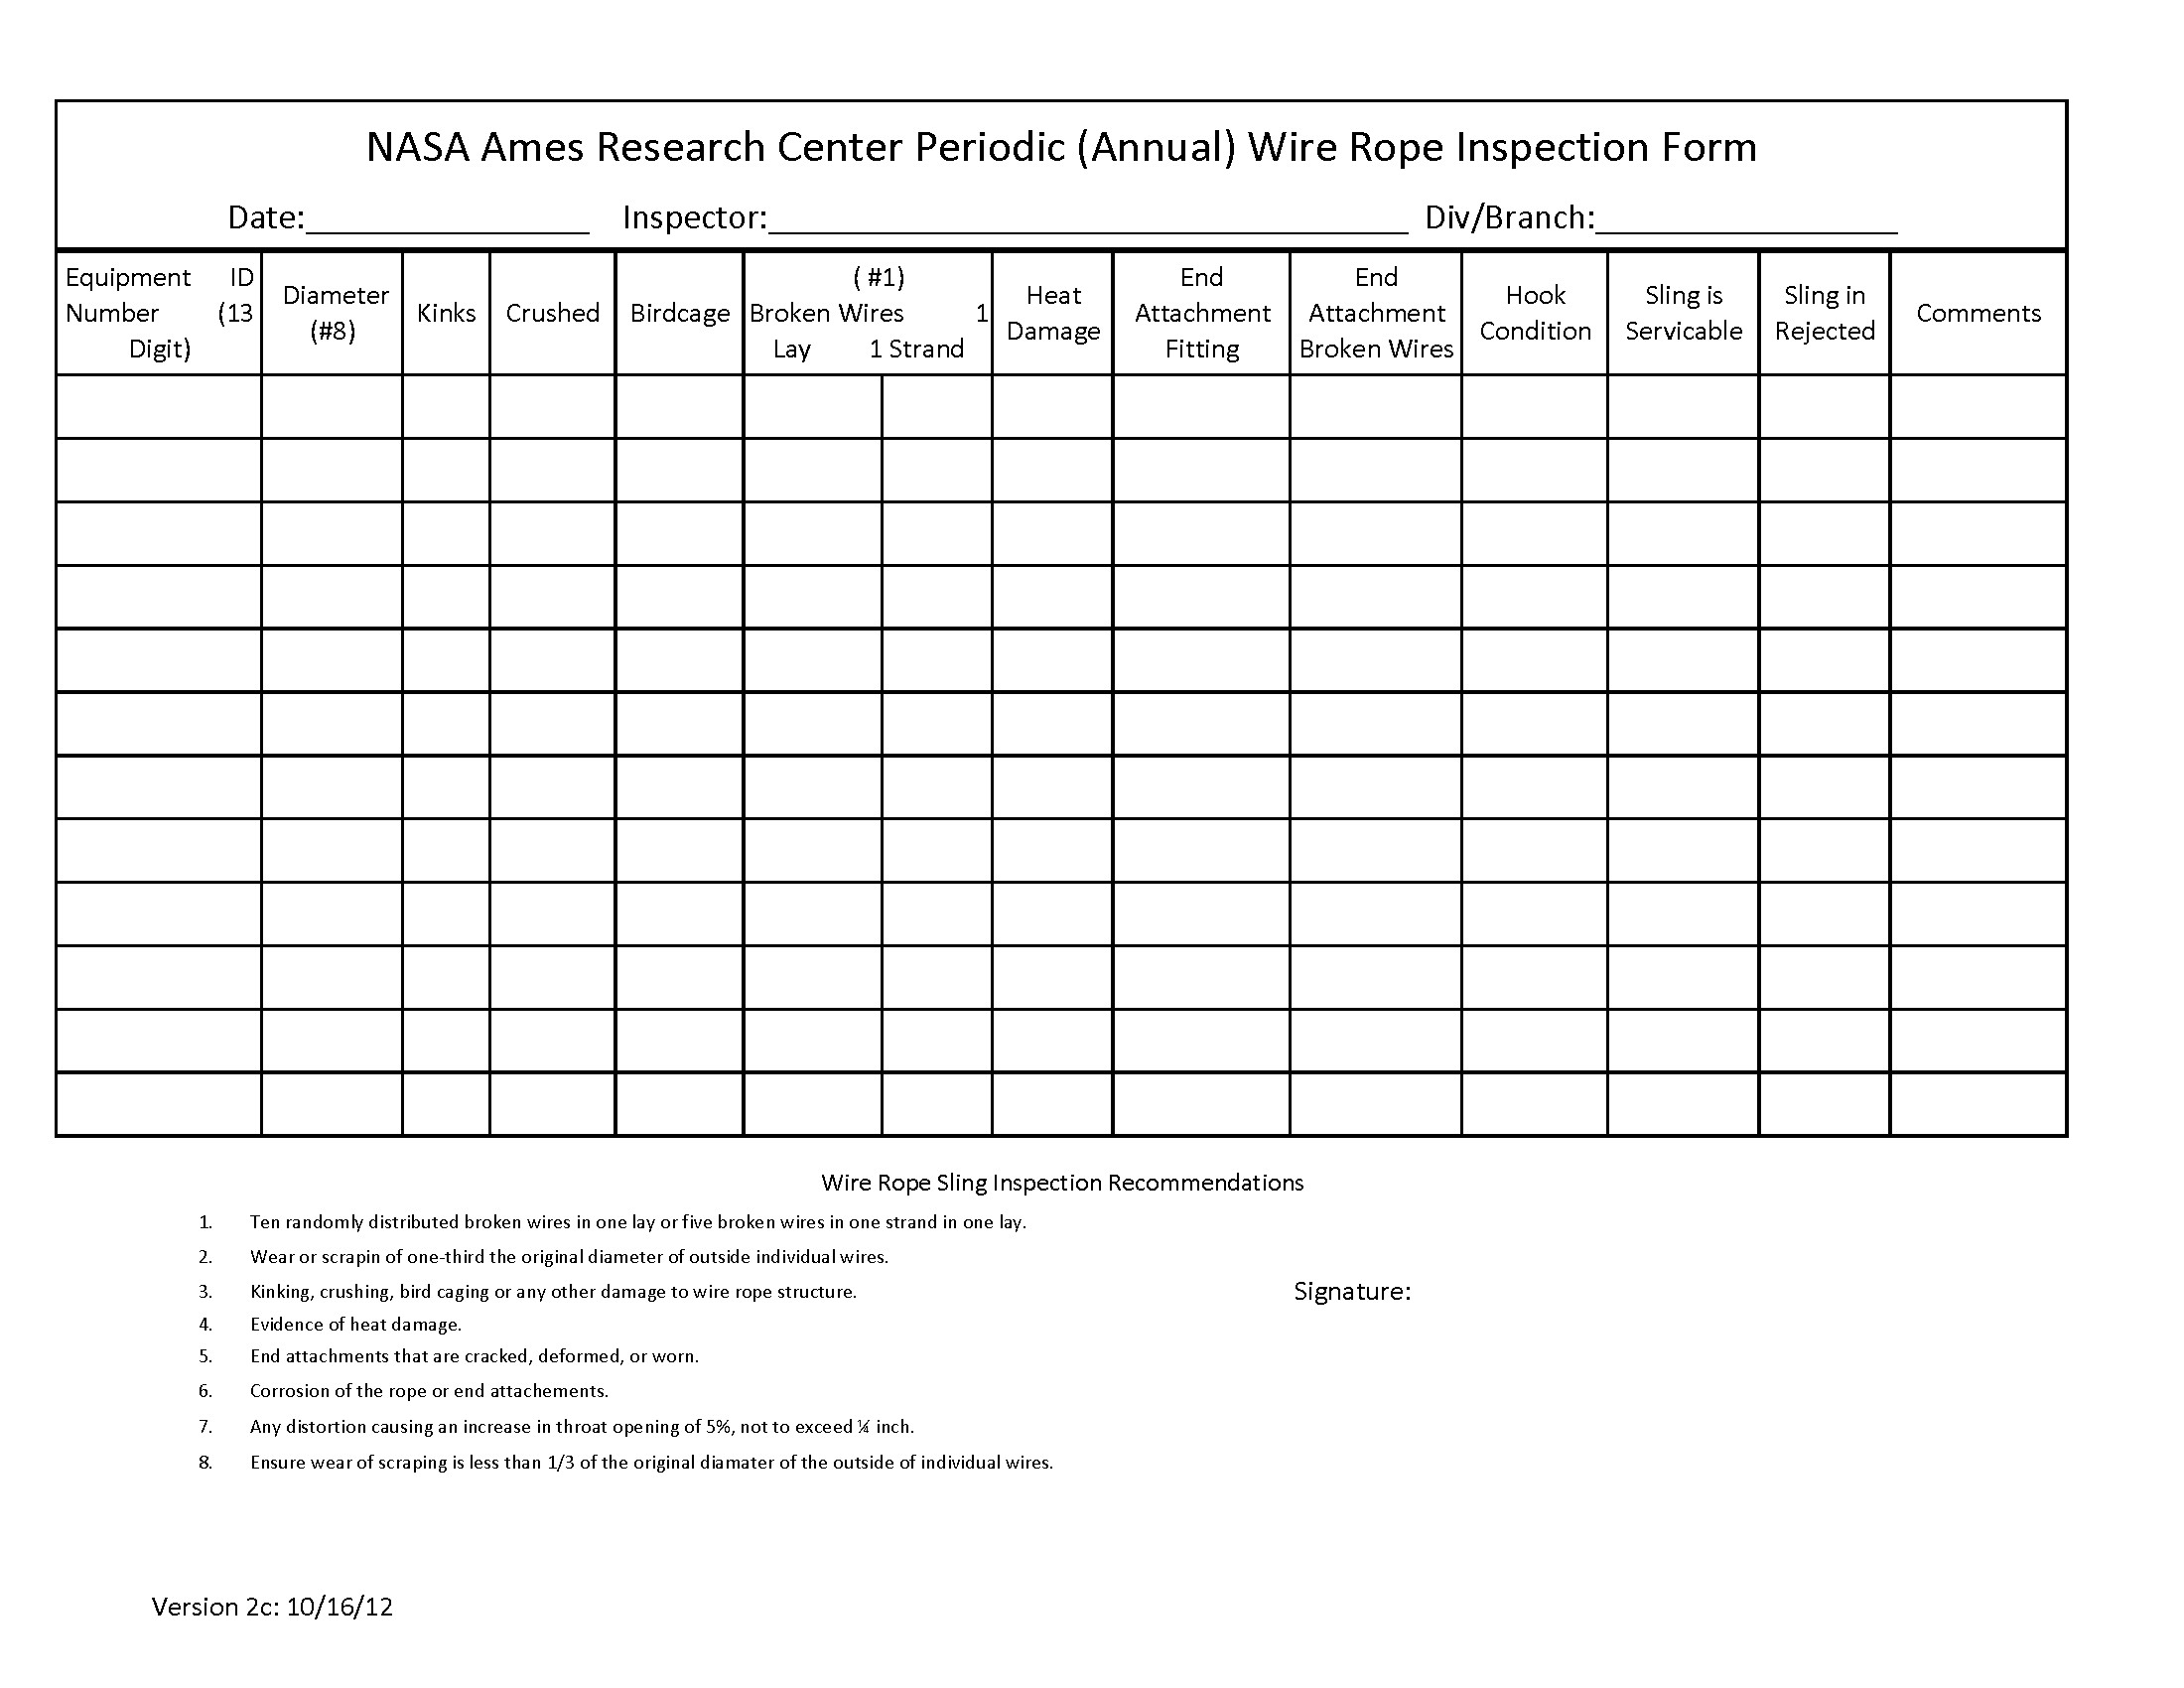 Inspection Log Sheet Nasa Ames Research Center Apg1700 1 Chapter 17